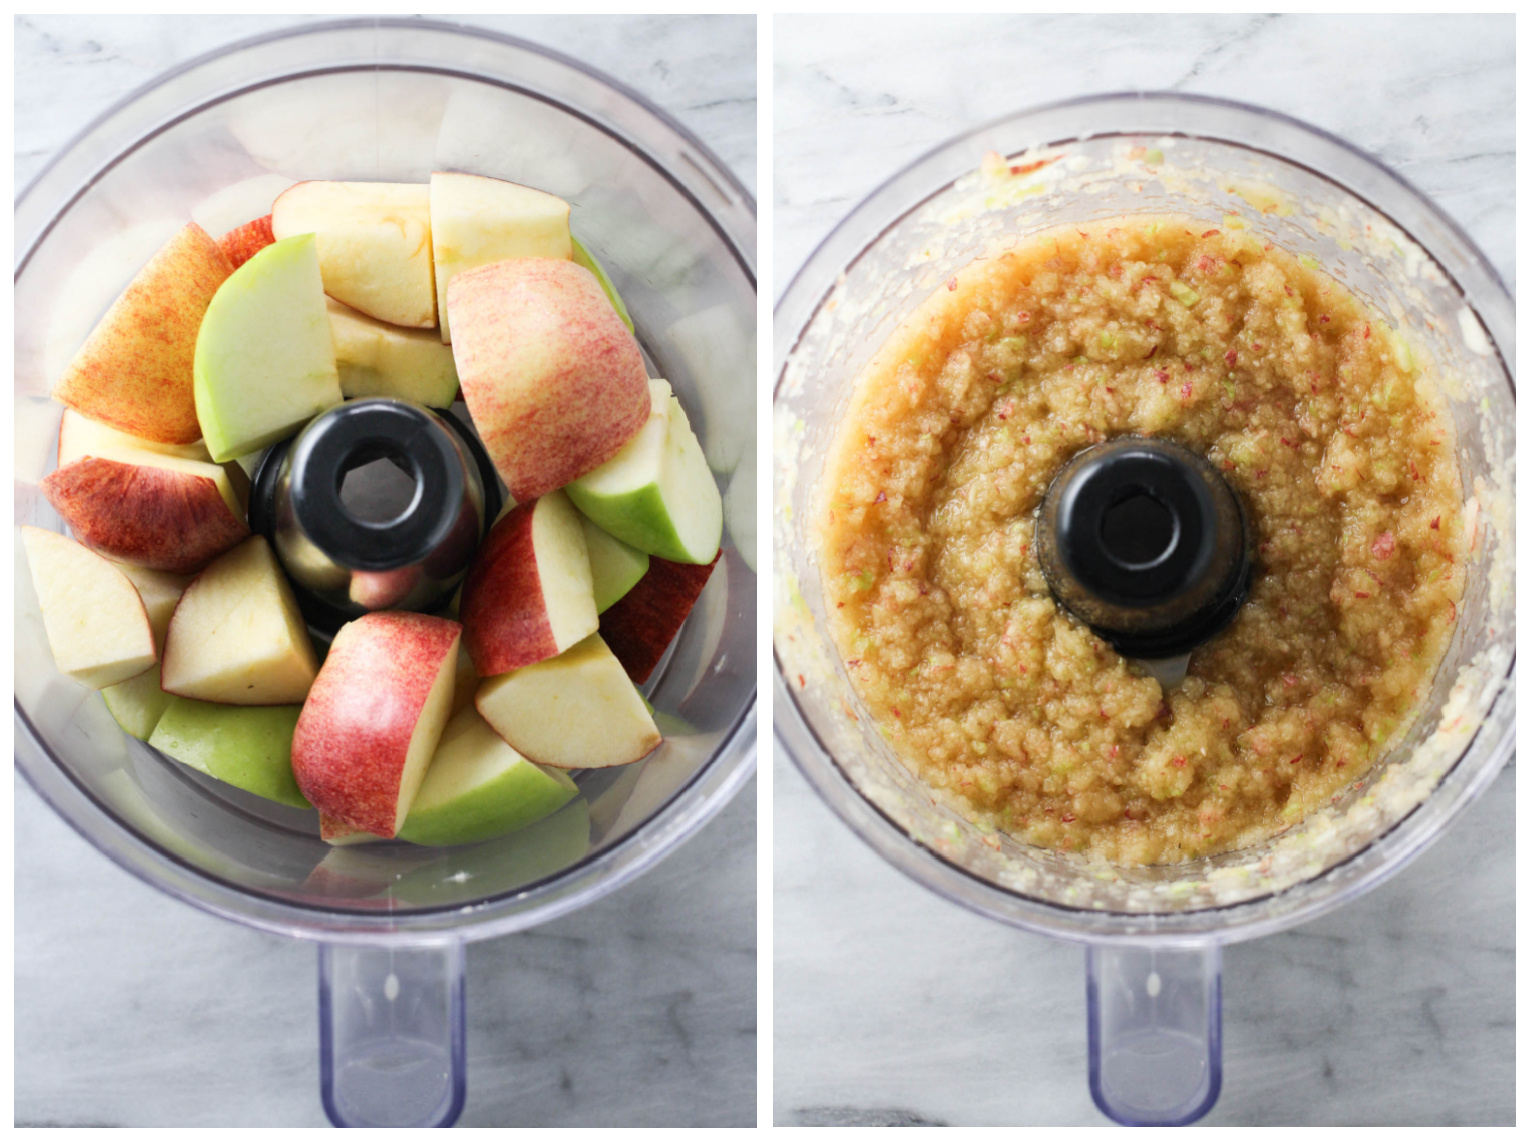 Collage of two images side-by-side. On the left, image of apple chunks inside a food processor. On the left, image of pureed apples inside a food processor.